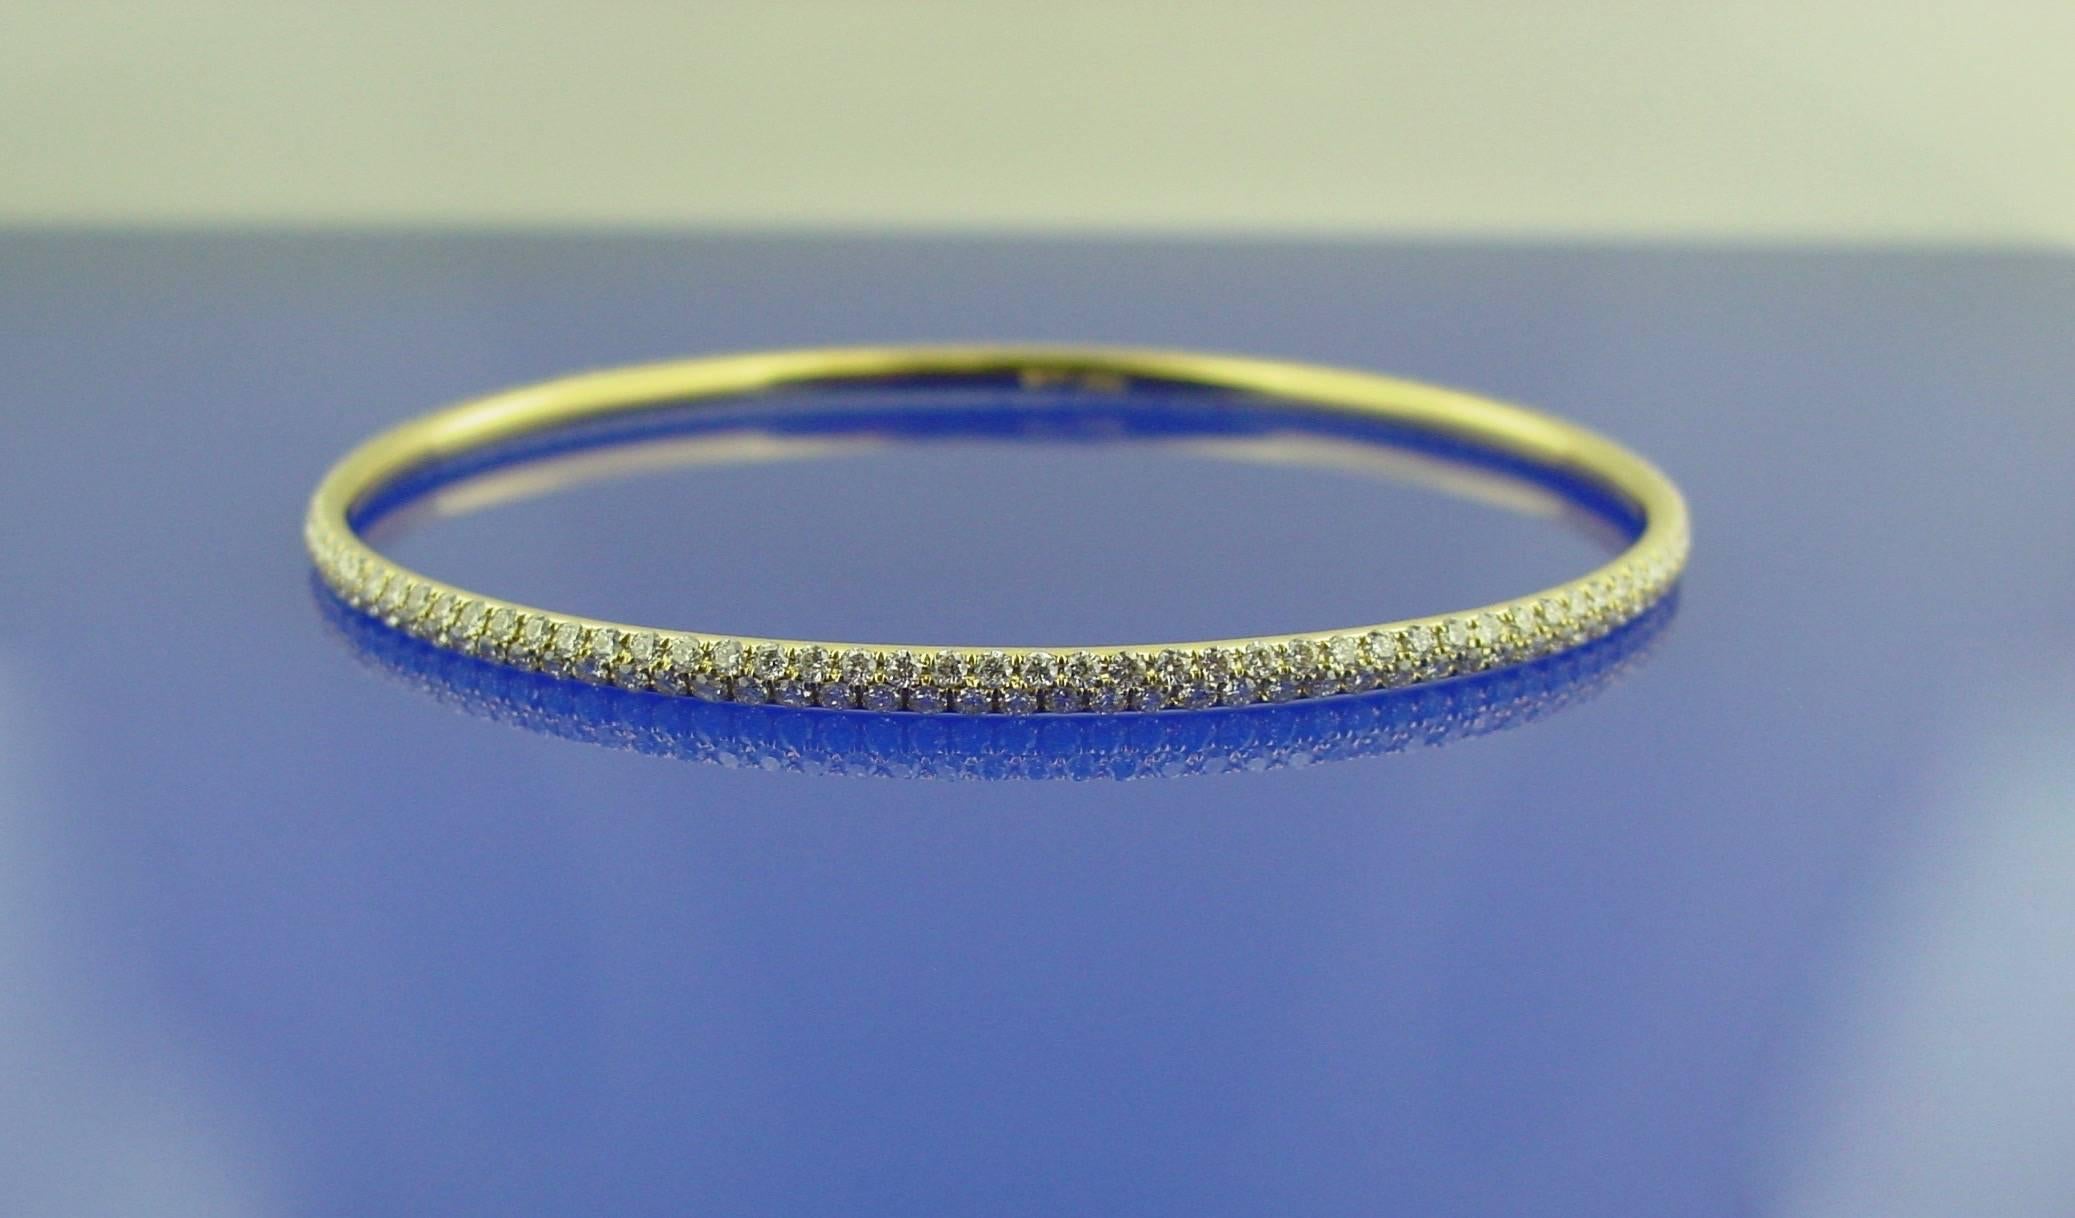 This elegant and eminently wearable bangle is encircled all around by two rows of round diamonds weighing 3.40 carats mounted in 18 karat yellow gold. Inner circumference of 7.13 inches.